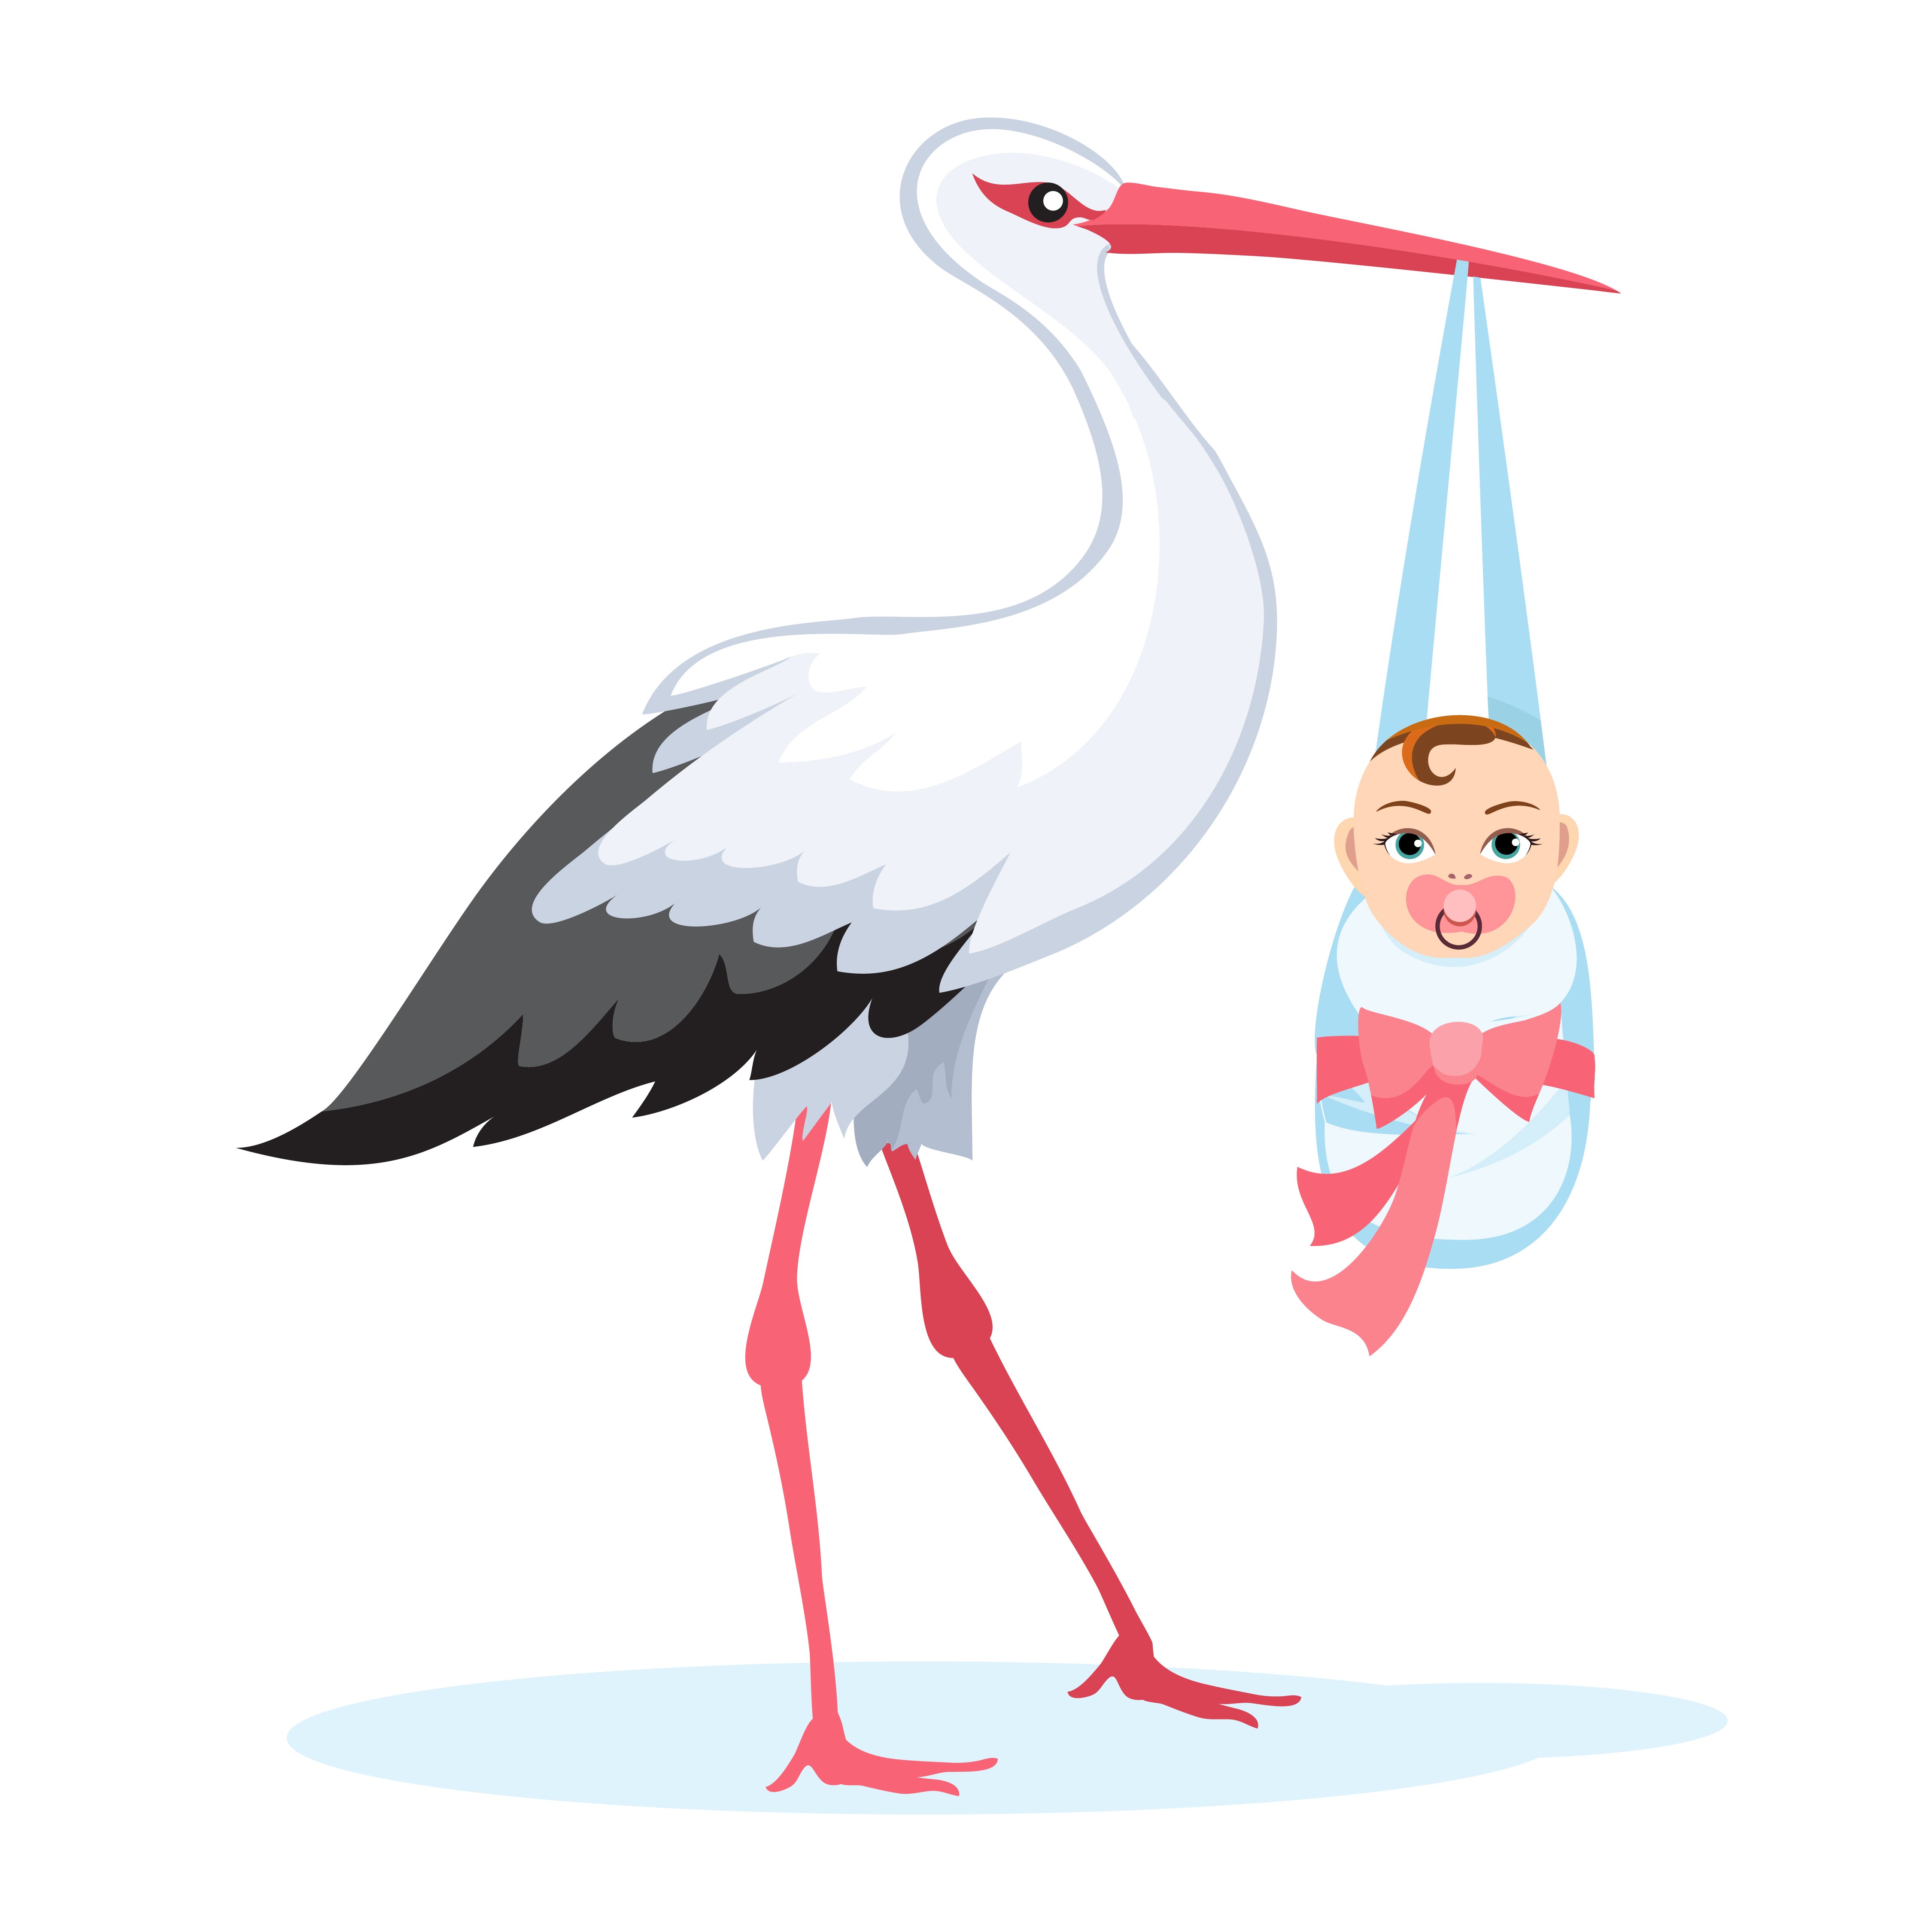 Stork carrying in baby in bundle isolated on white. Vector illustration